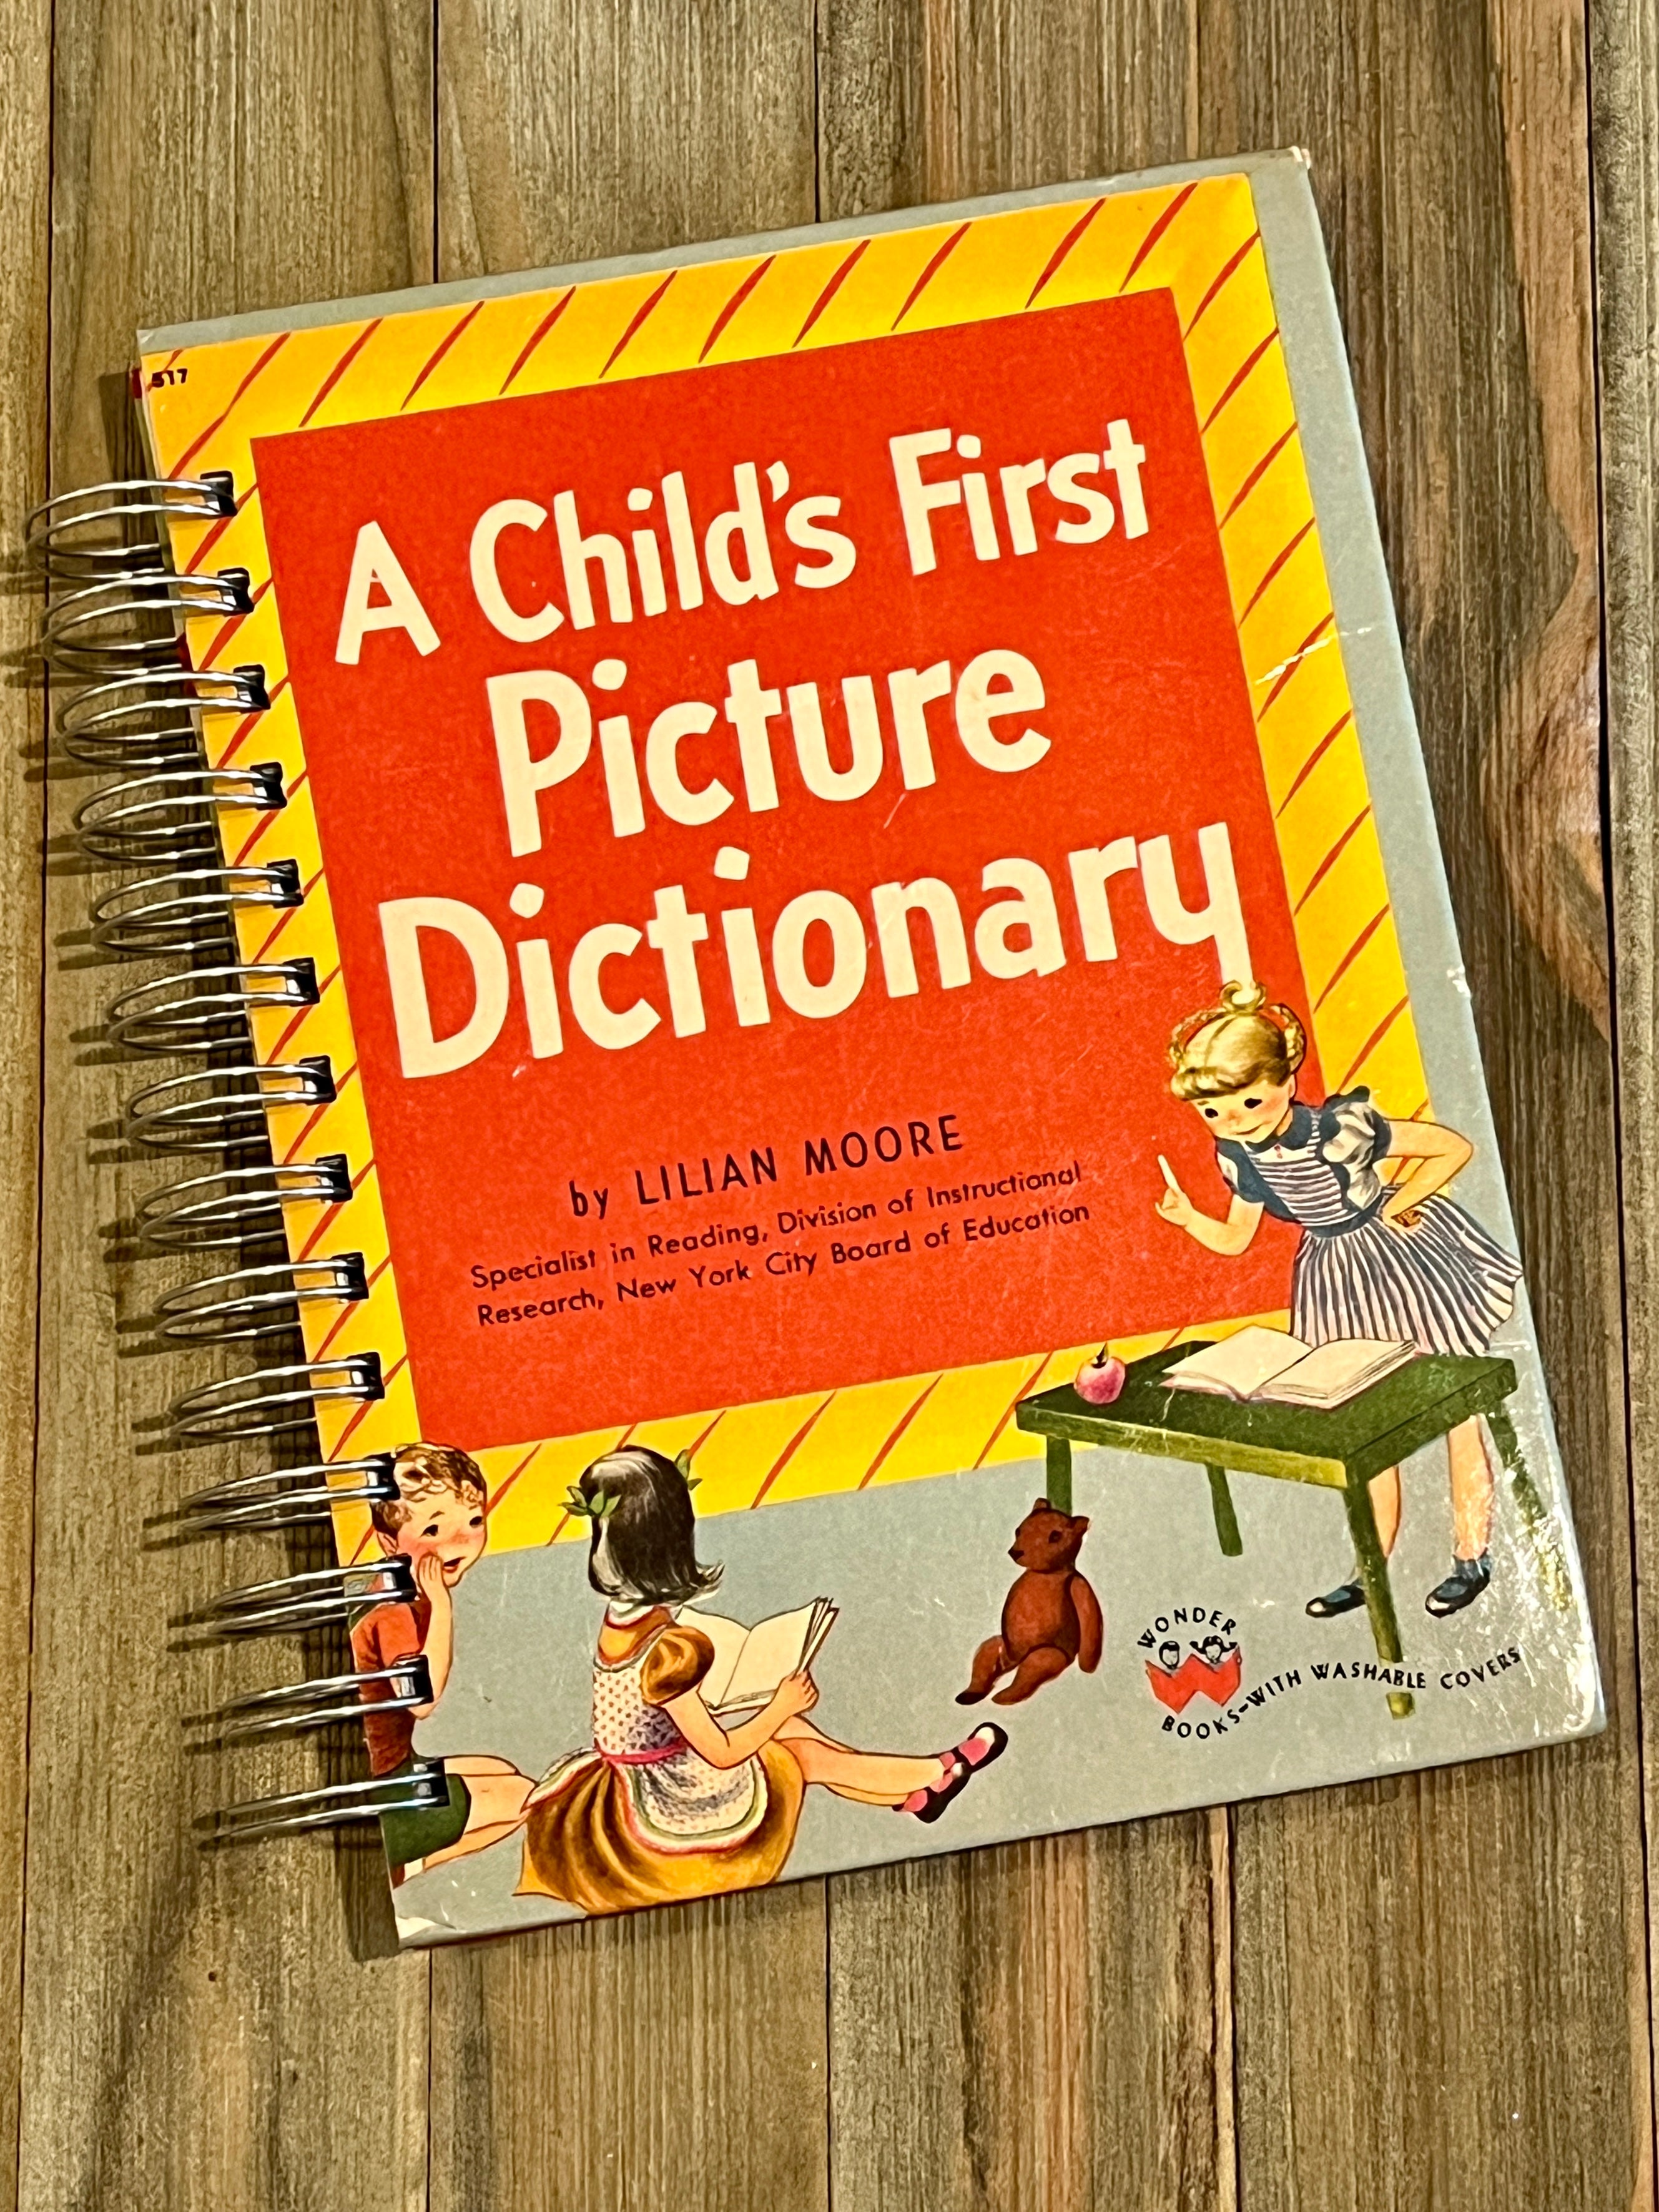 A Child's First Picture Dictionary